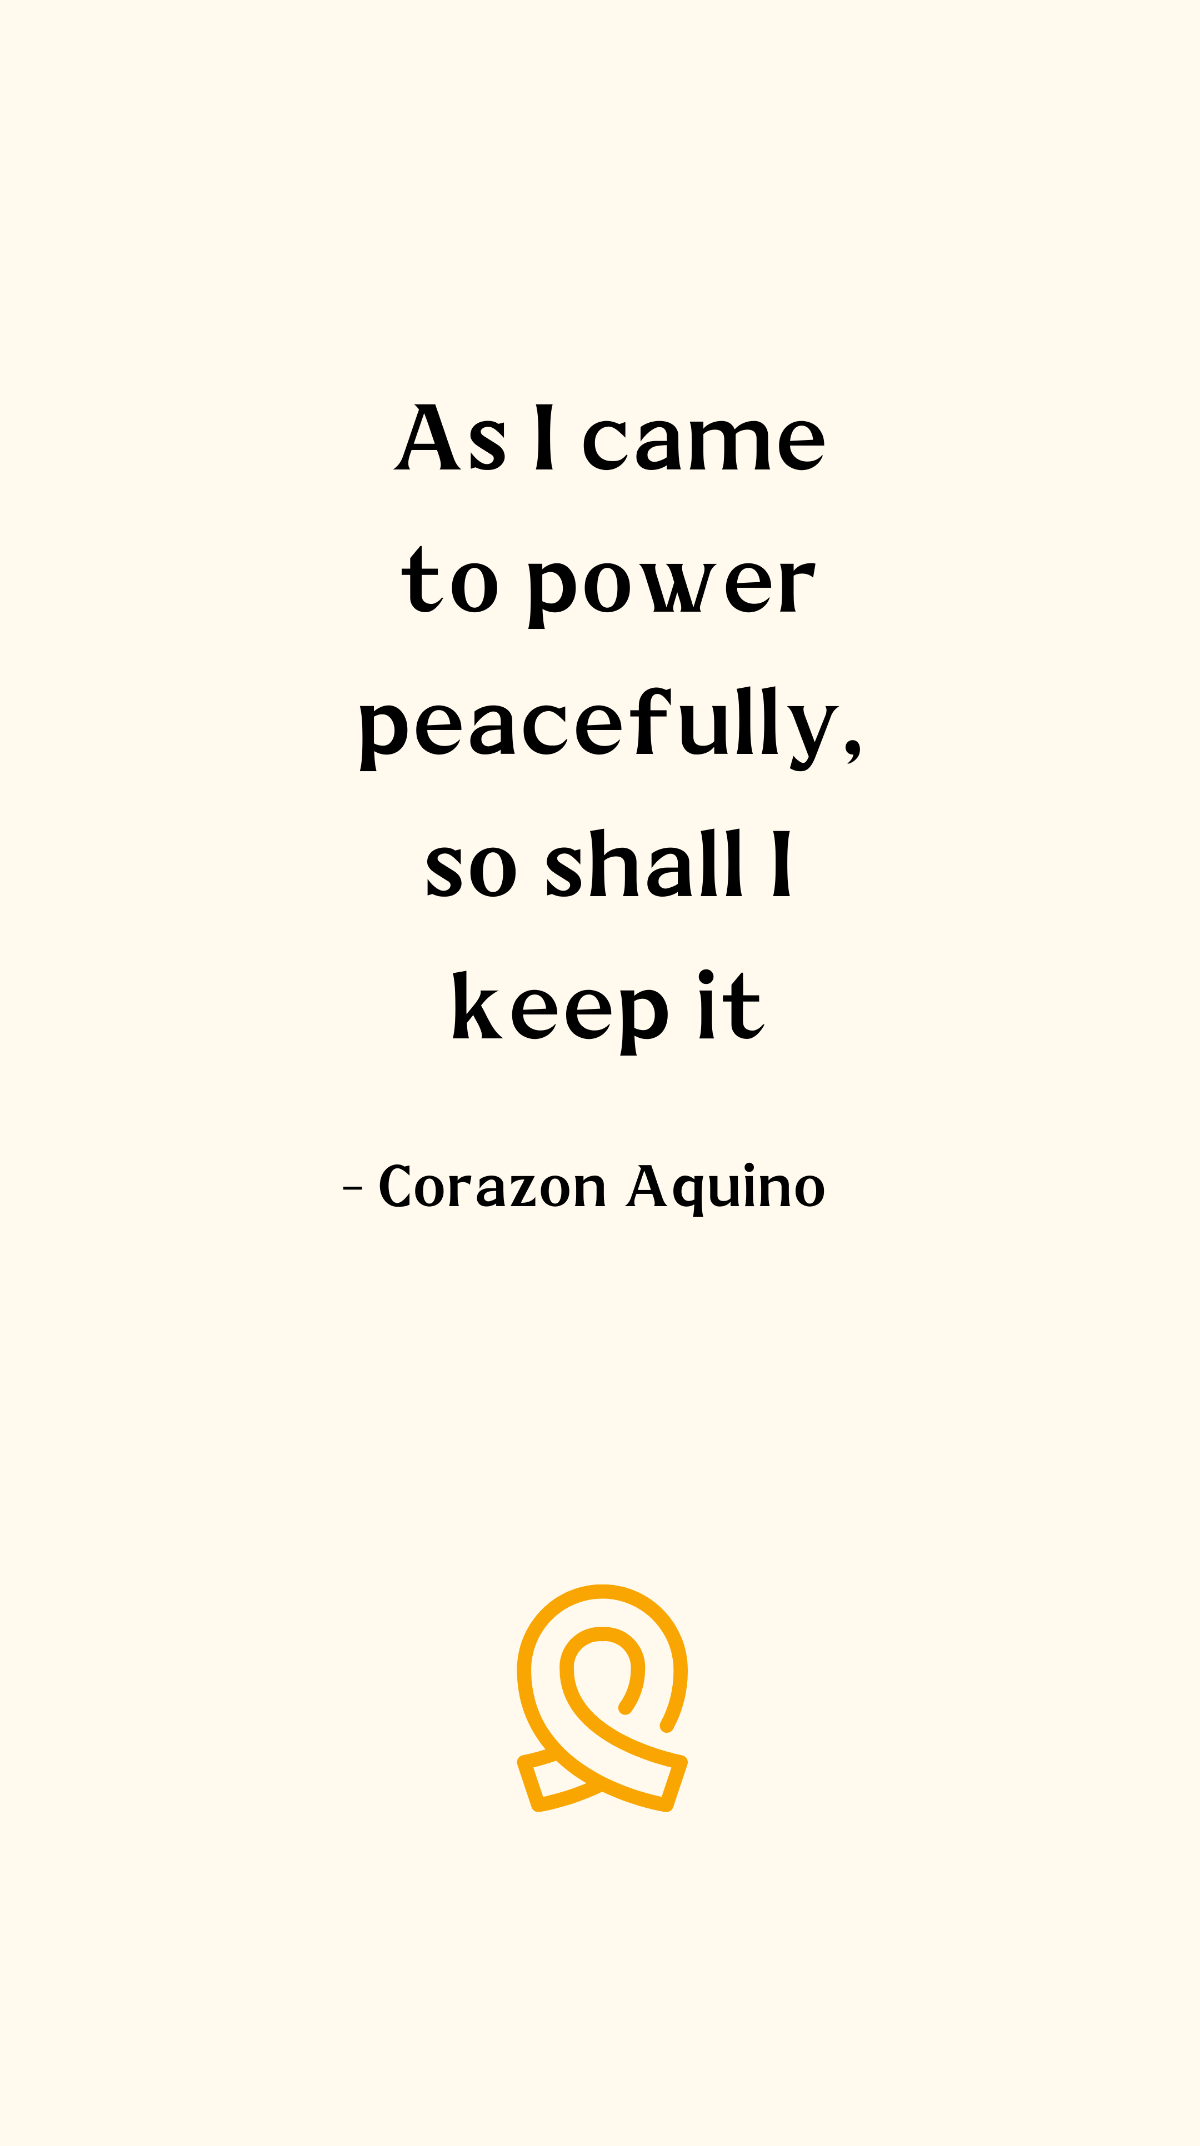 Corazon Aquino - As I came to power peacefully, so shall I keep it Template